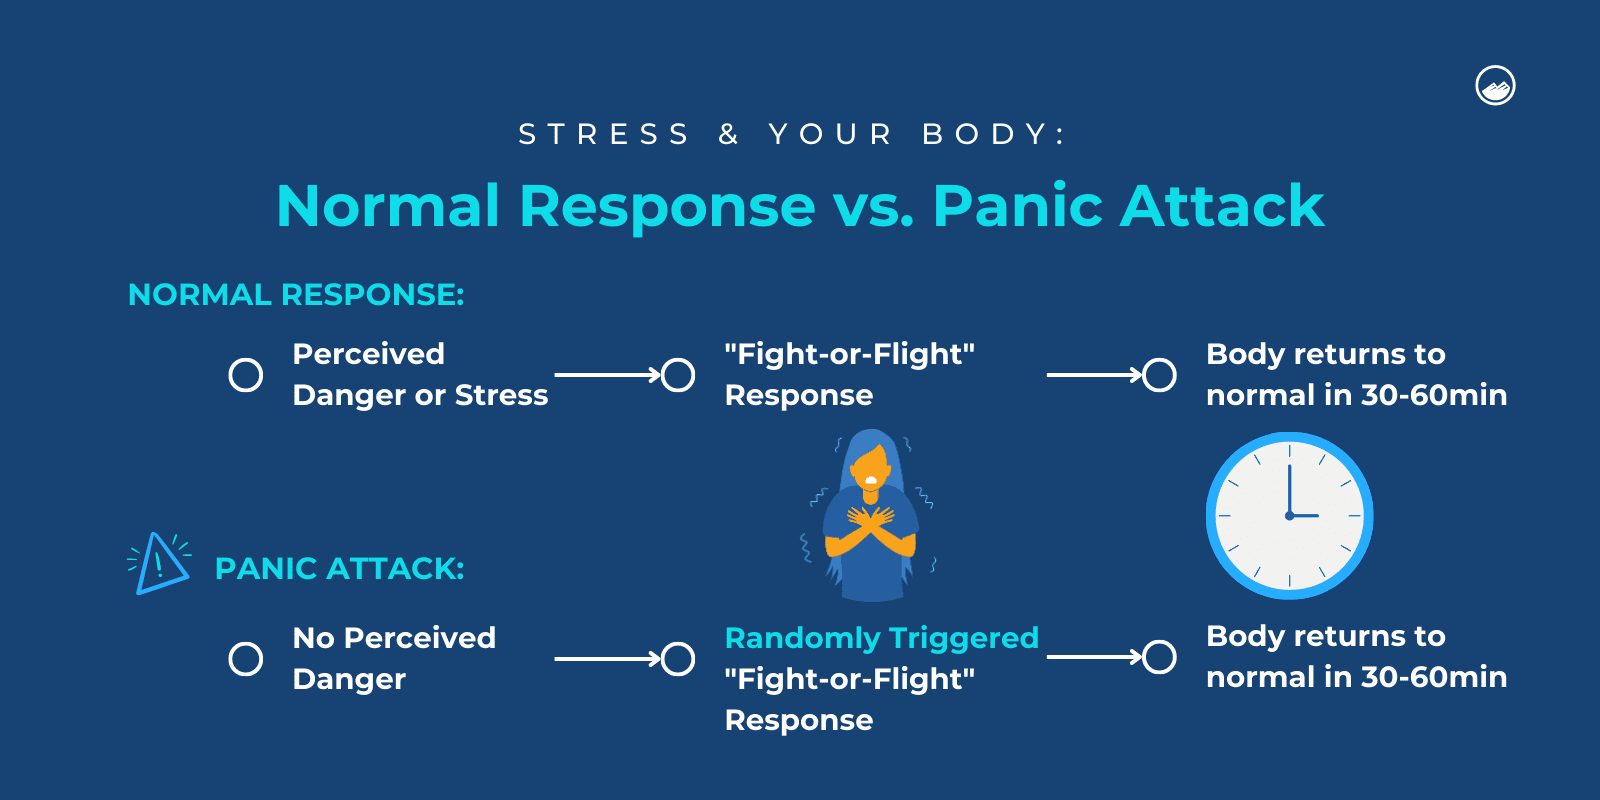 "Stress & Your Body: Normal Response vs. Panic Attack" illustrated with comparing how panic attack randomly triggers fight-or-flight response